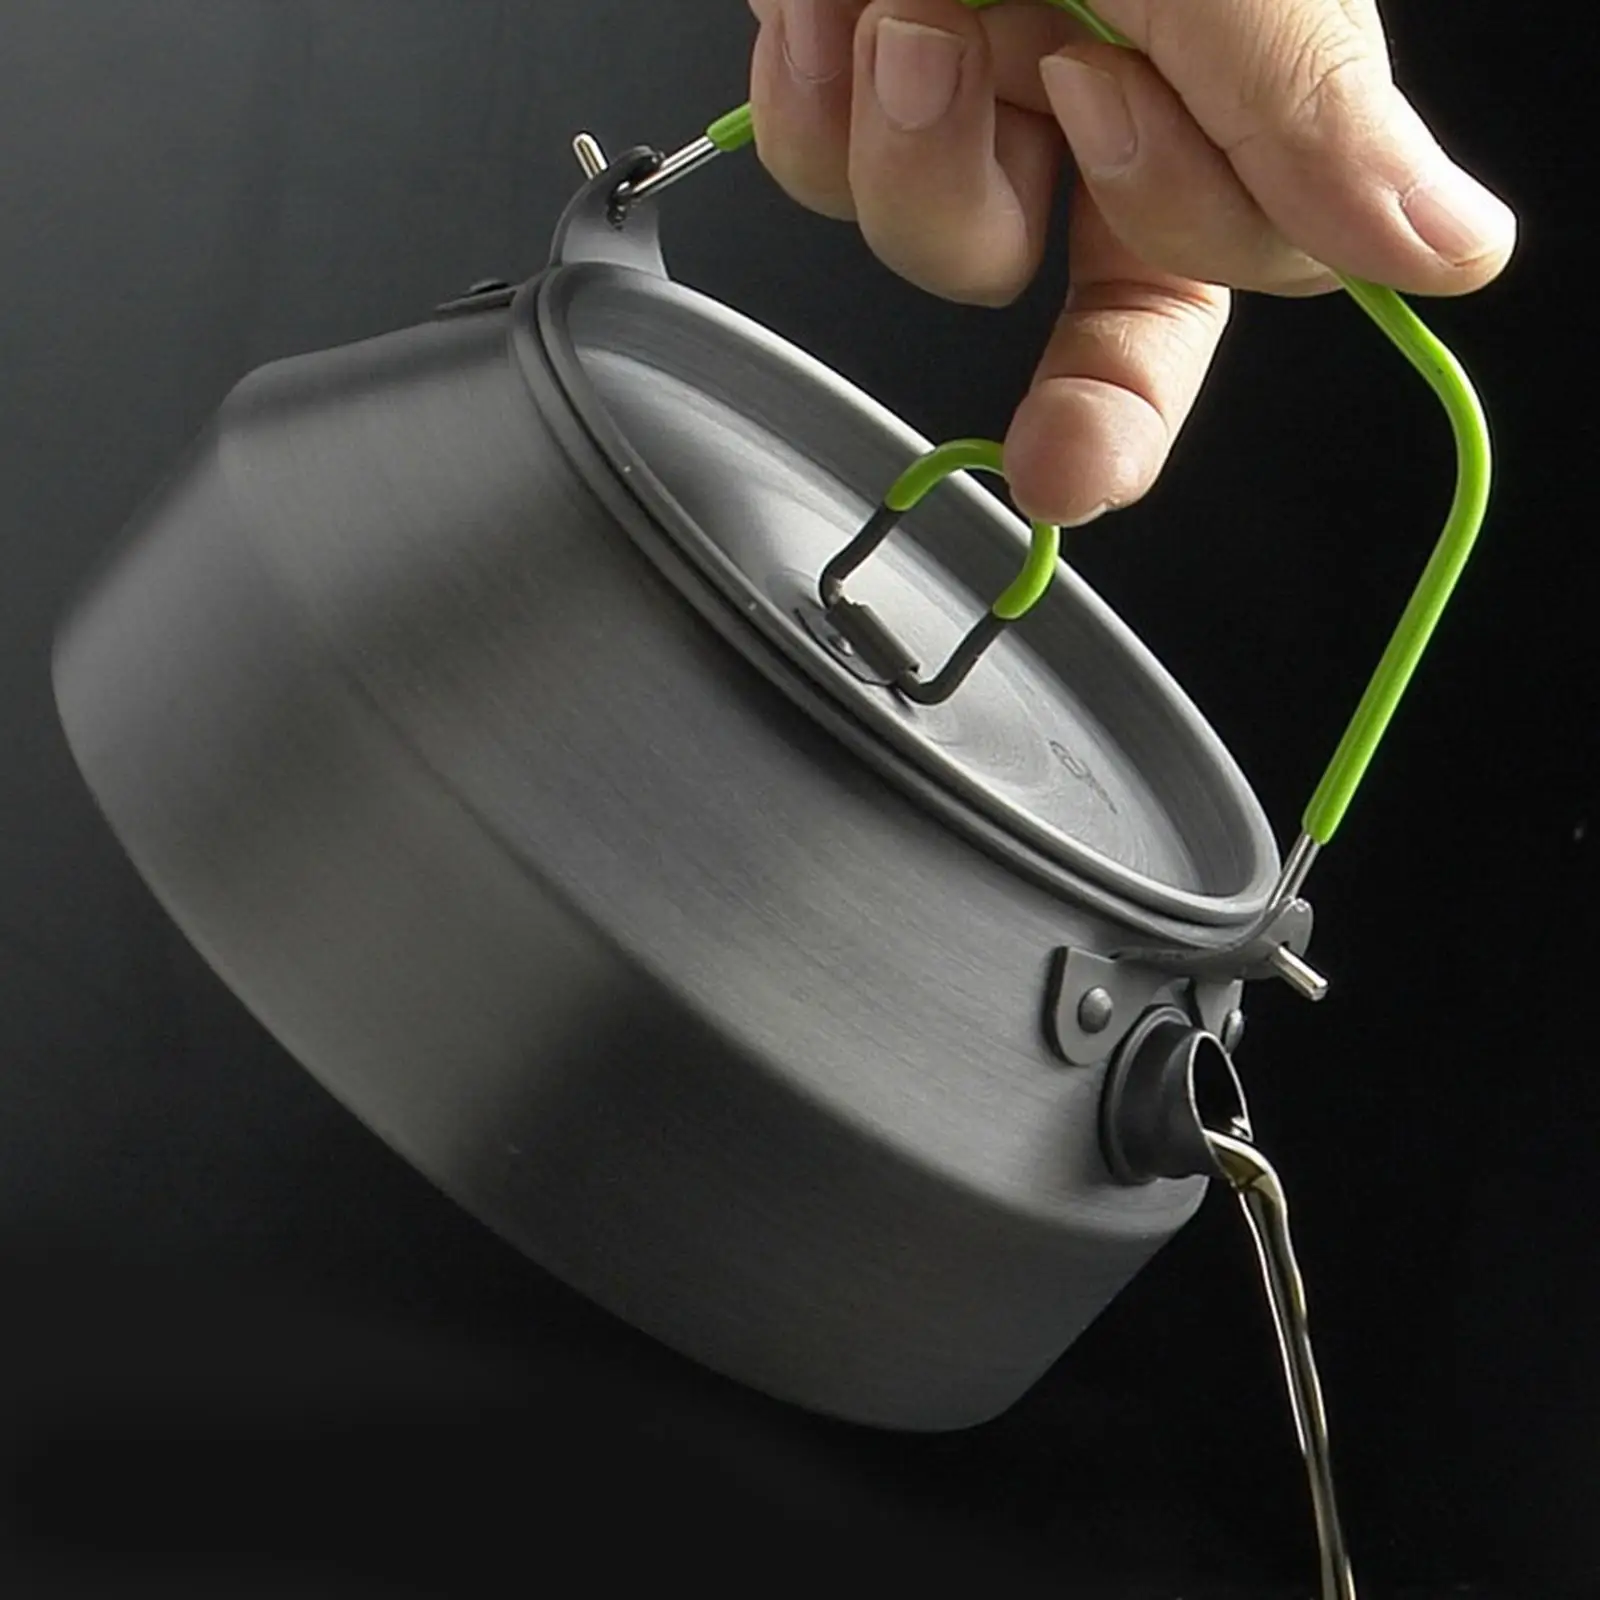 800ml Camping Water Kettle Coffee Pot Cooking Supplies Travel Hiking Gear with Handle Outdoor Ultralight